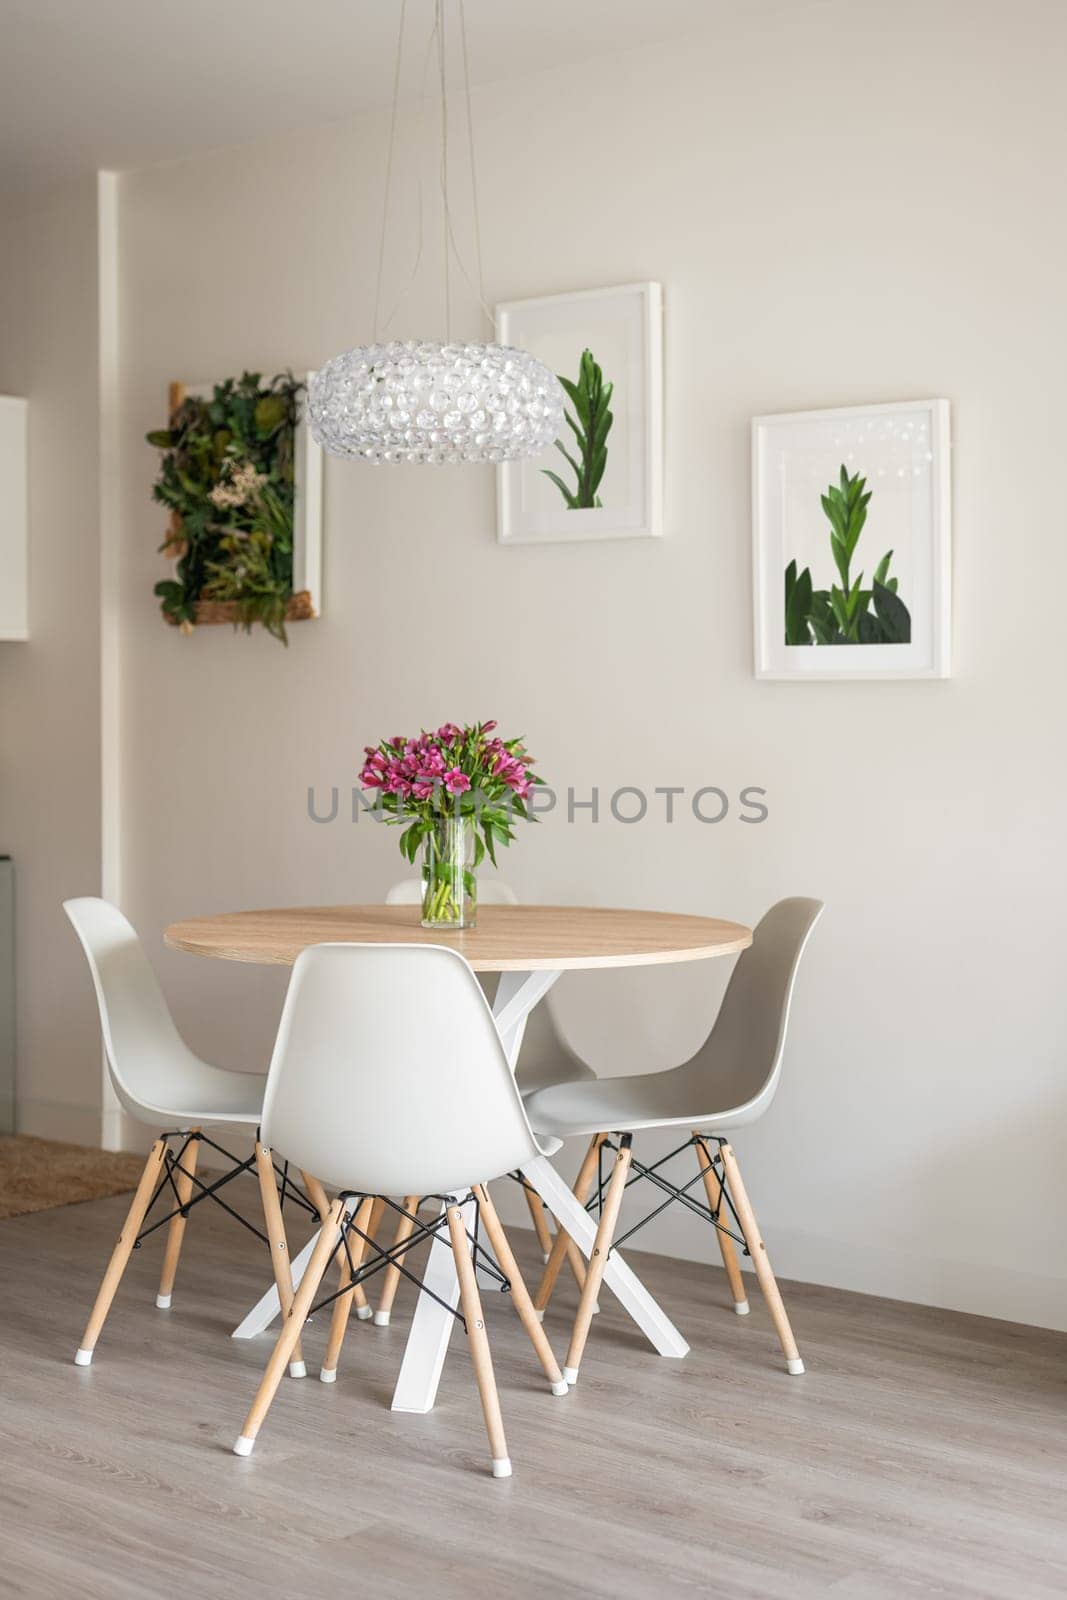 Vase with flowers stands on a wooden table next to chairs on background of wall with posters of green plants with beige wallpaper with a crystal chandelier. Botanical eco interior concept.